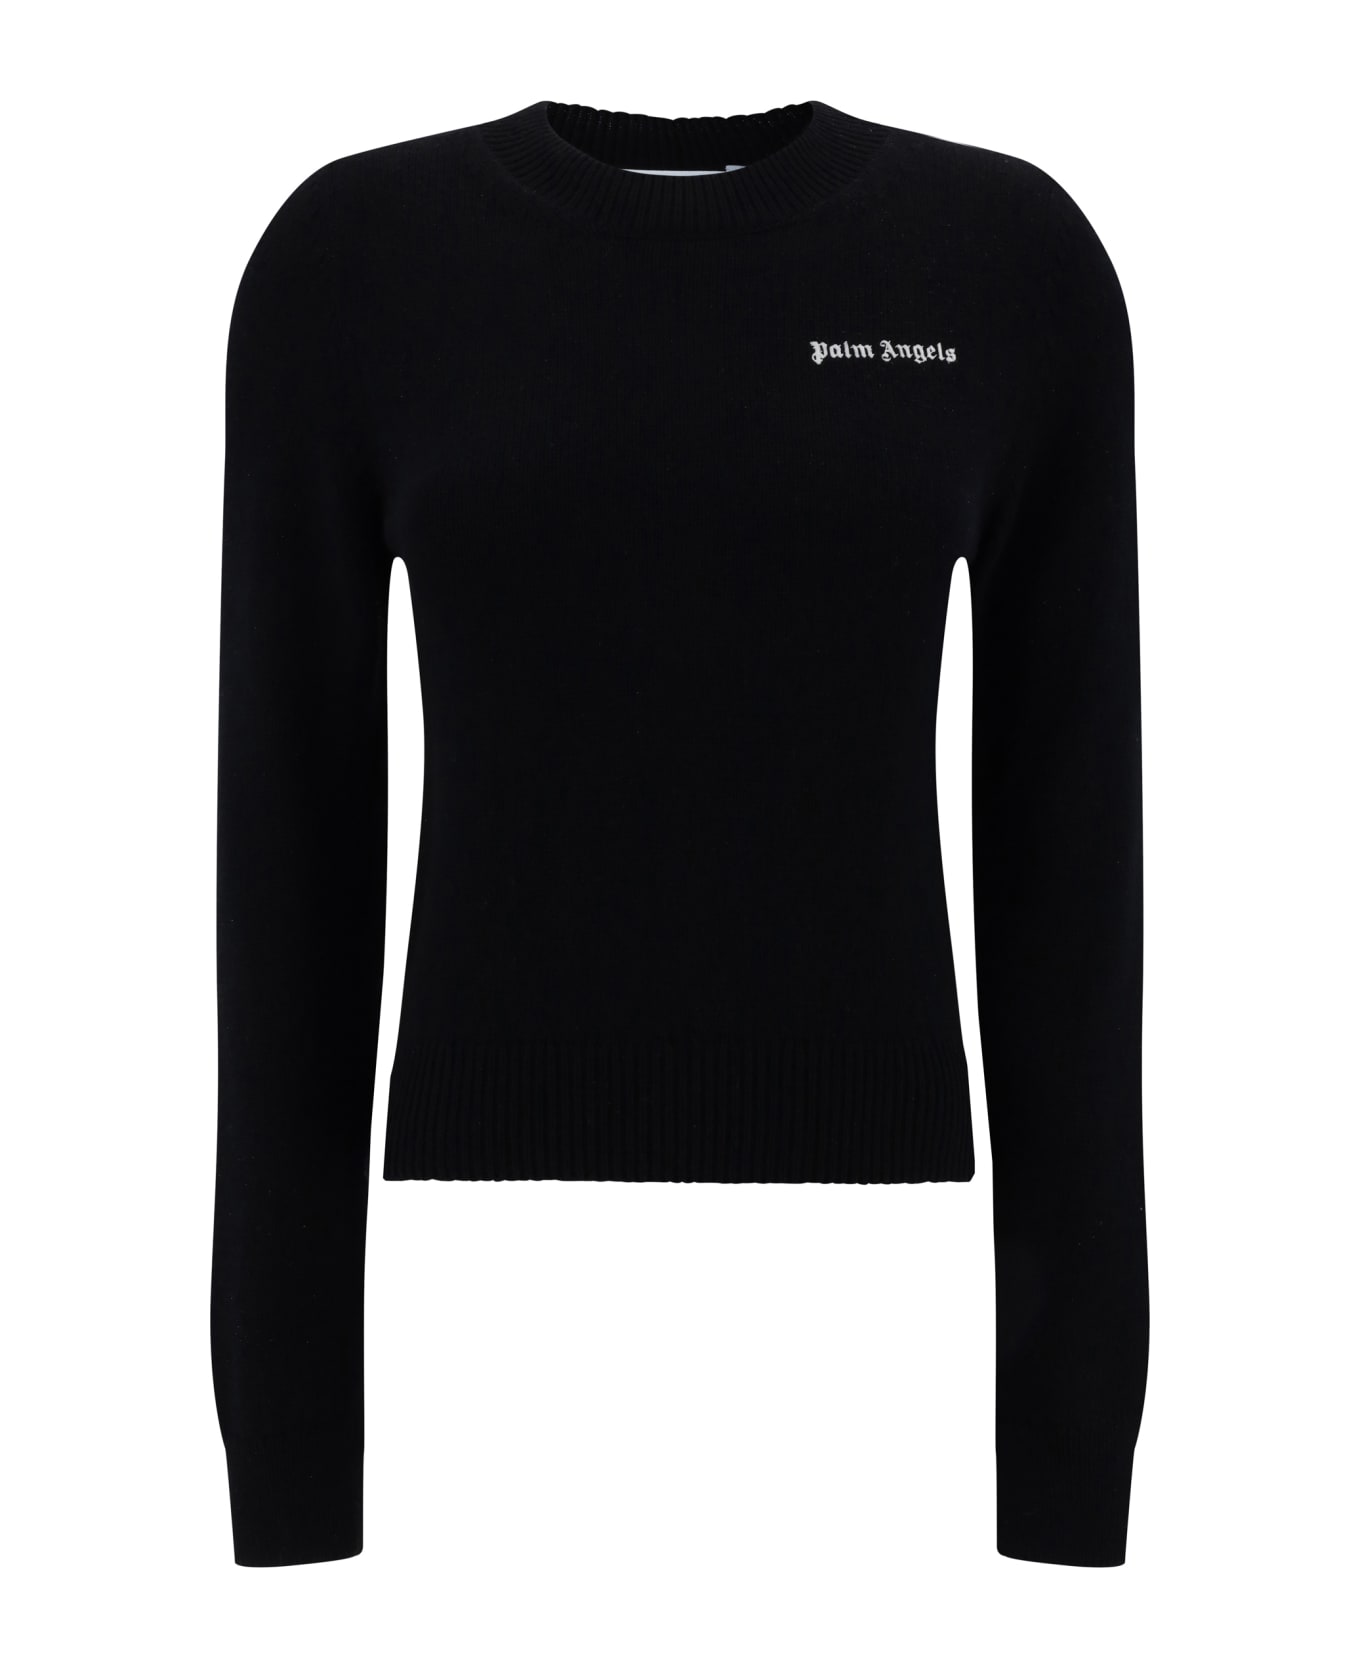 Palm Angels Sweater By - Black Off